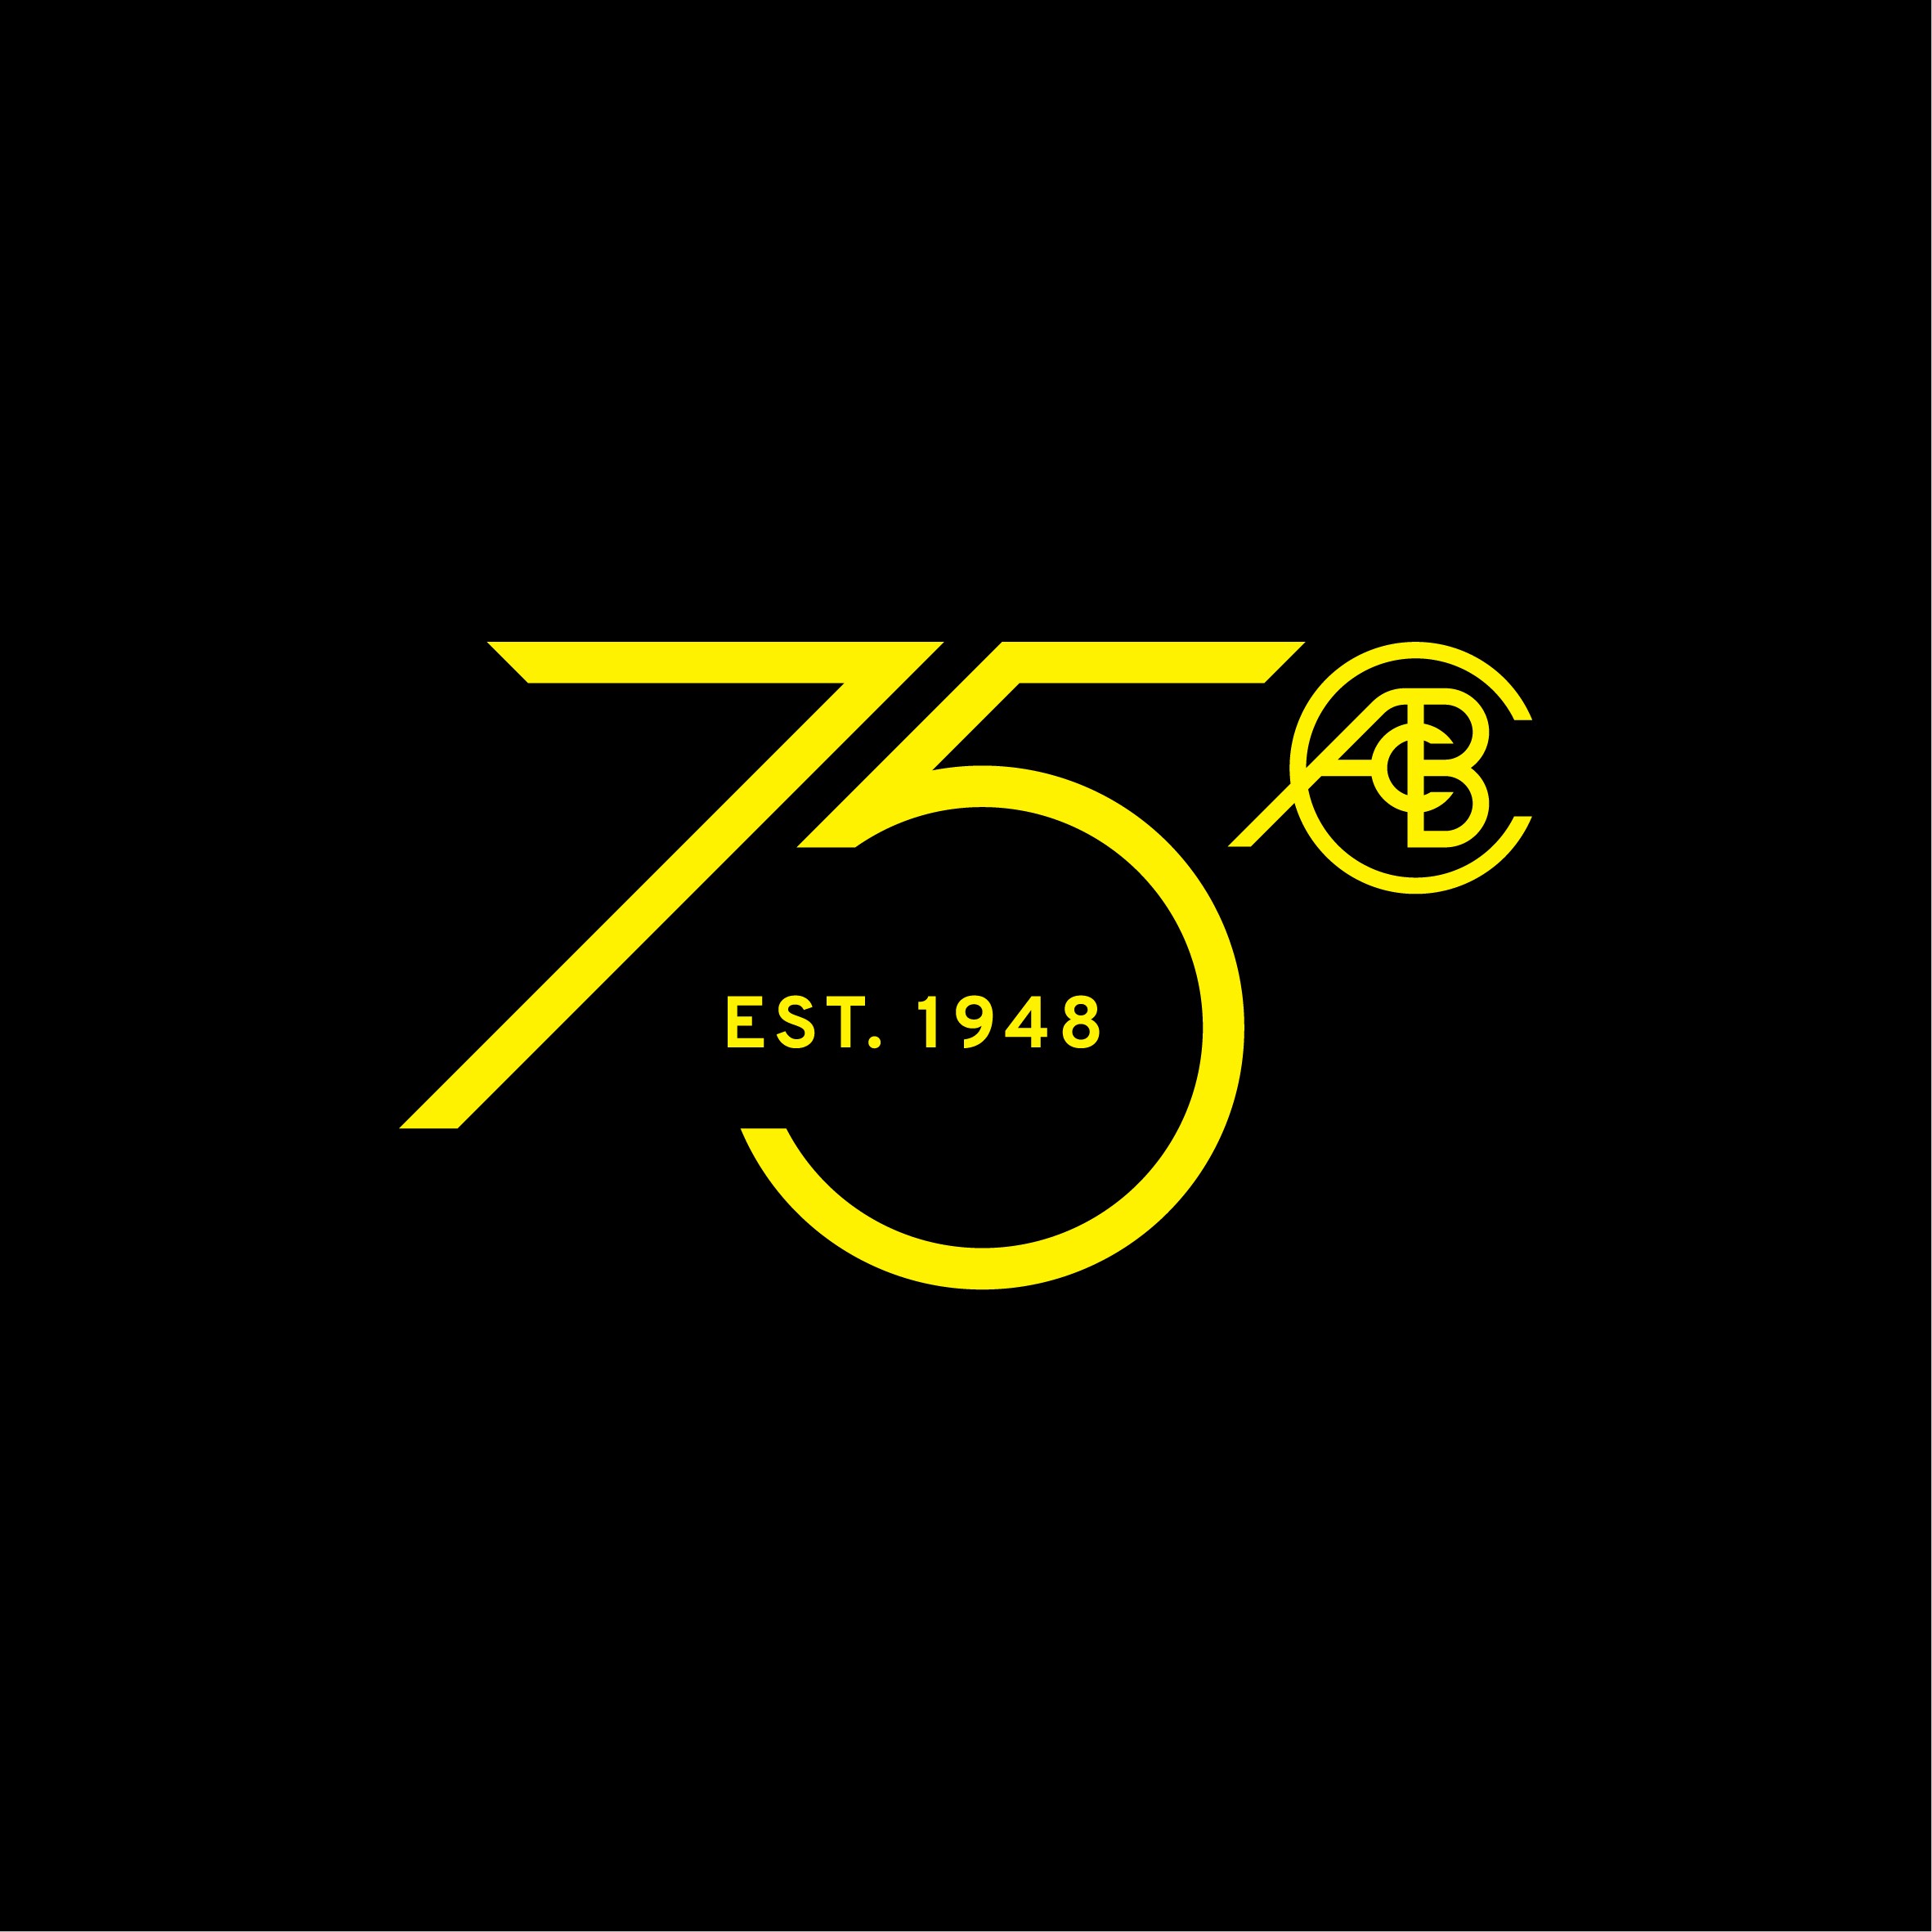 Lotus Celebrates 75th Anniversary with Special Branding